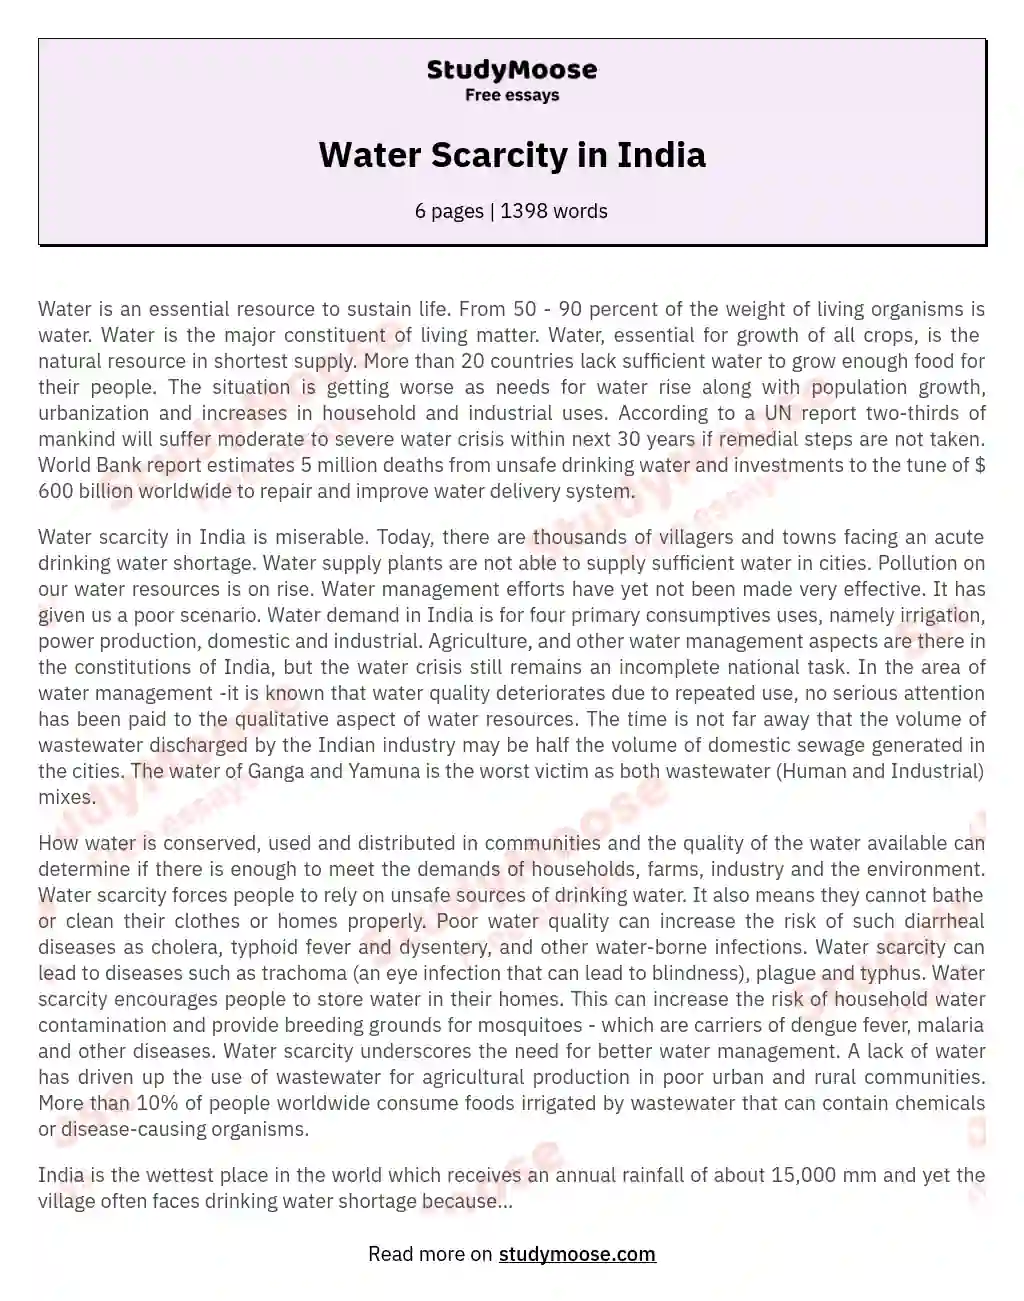 Water Scarcity in India essay